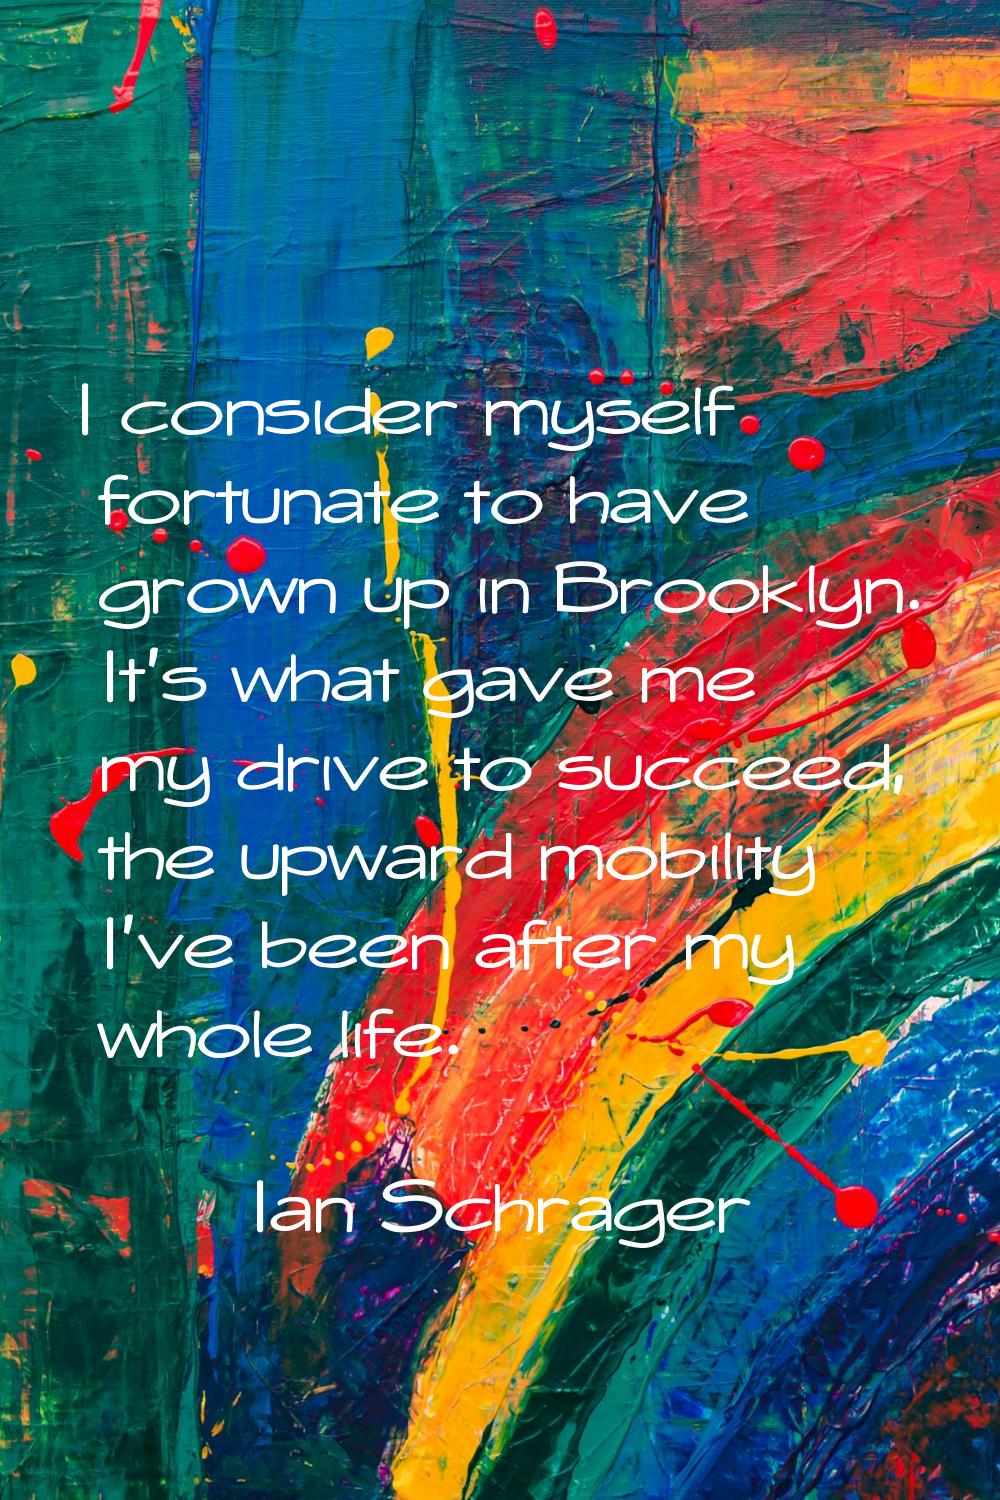 I consider myself fortunate to have grown up in Brooklyn. It's what gave me my drive to succeed, th